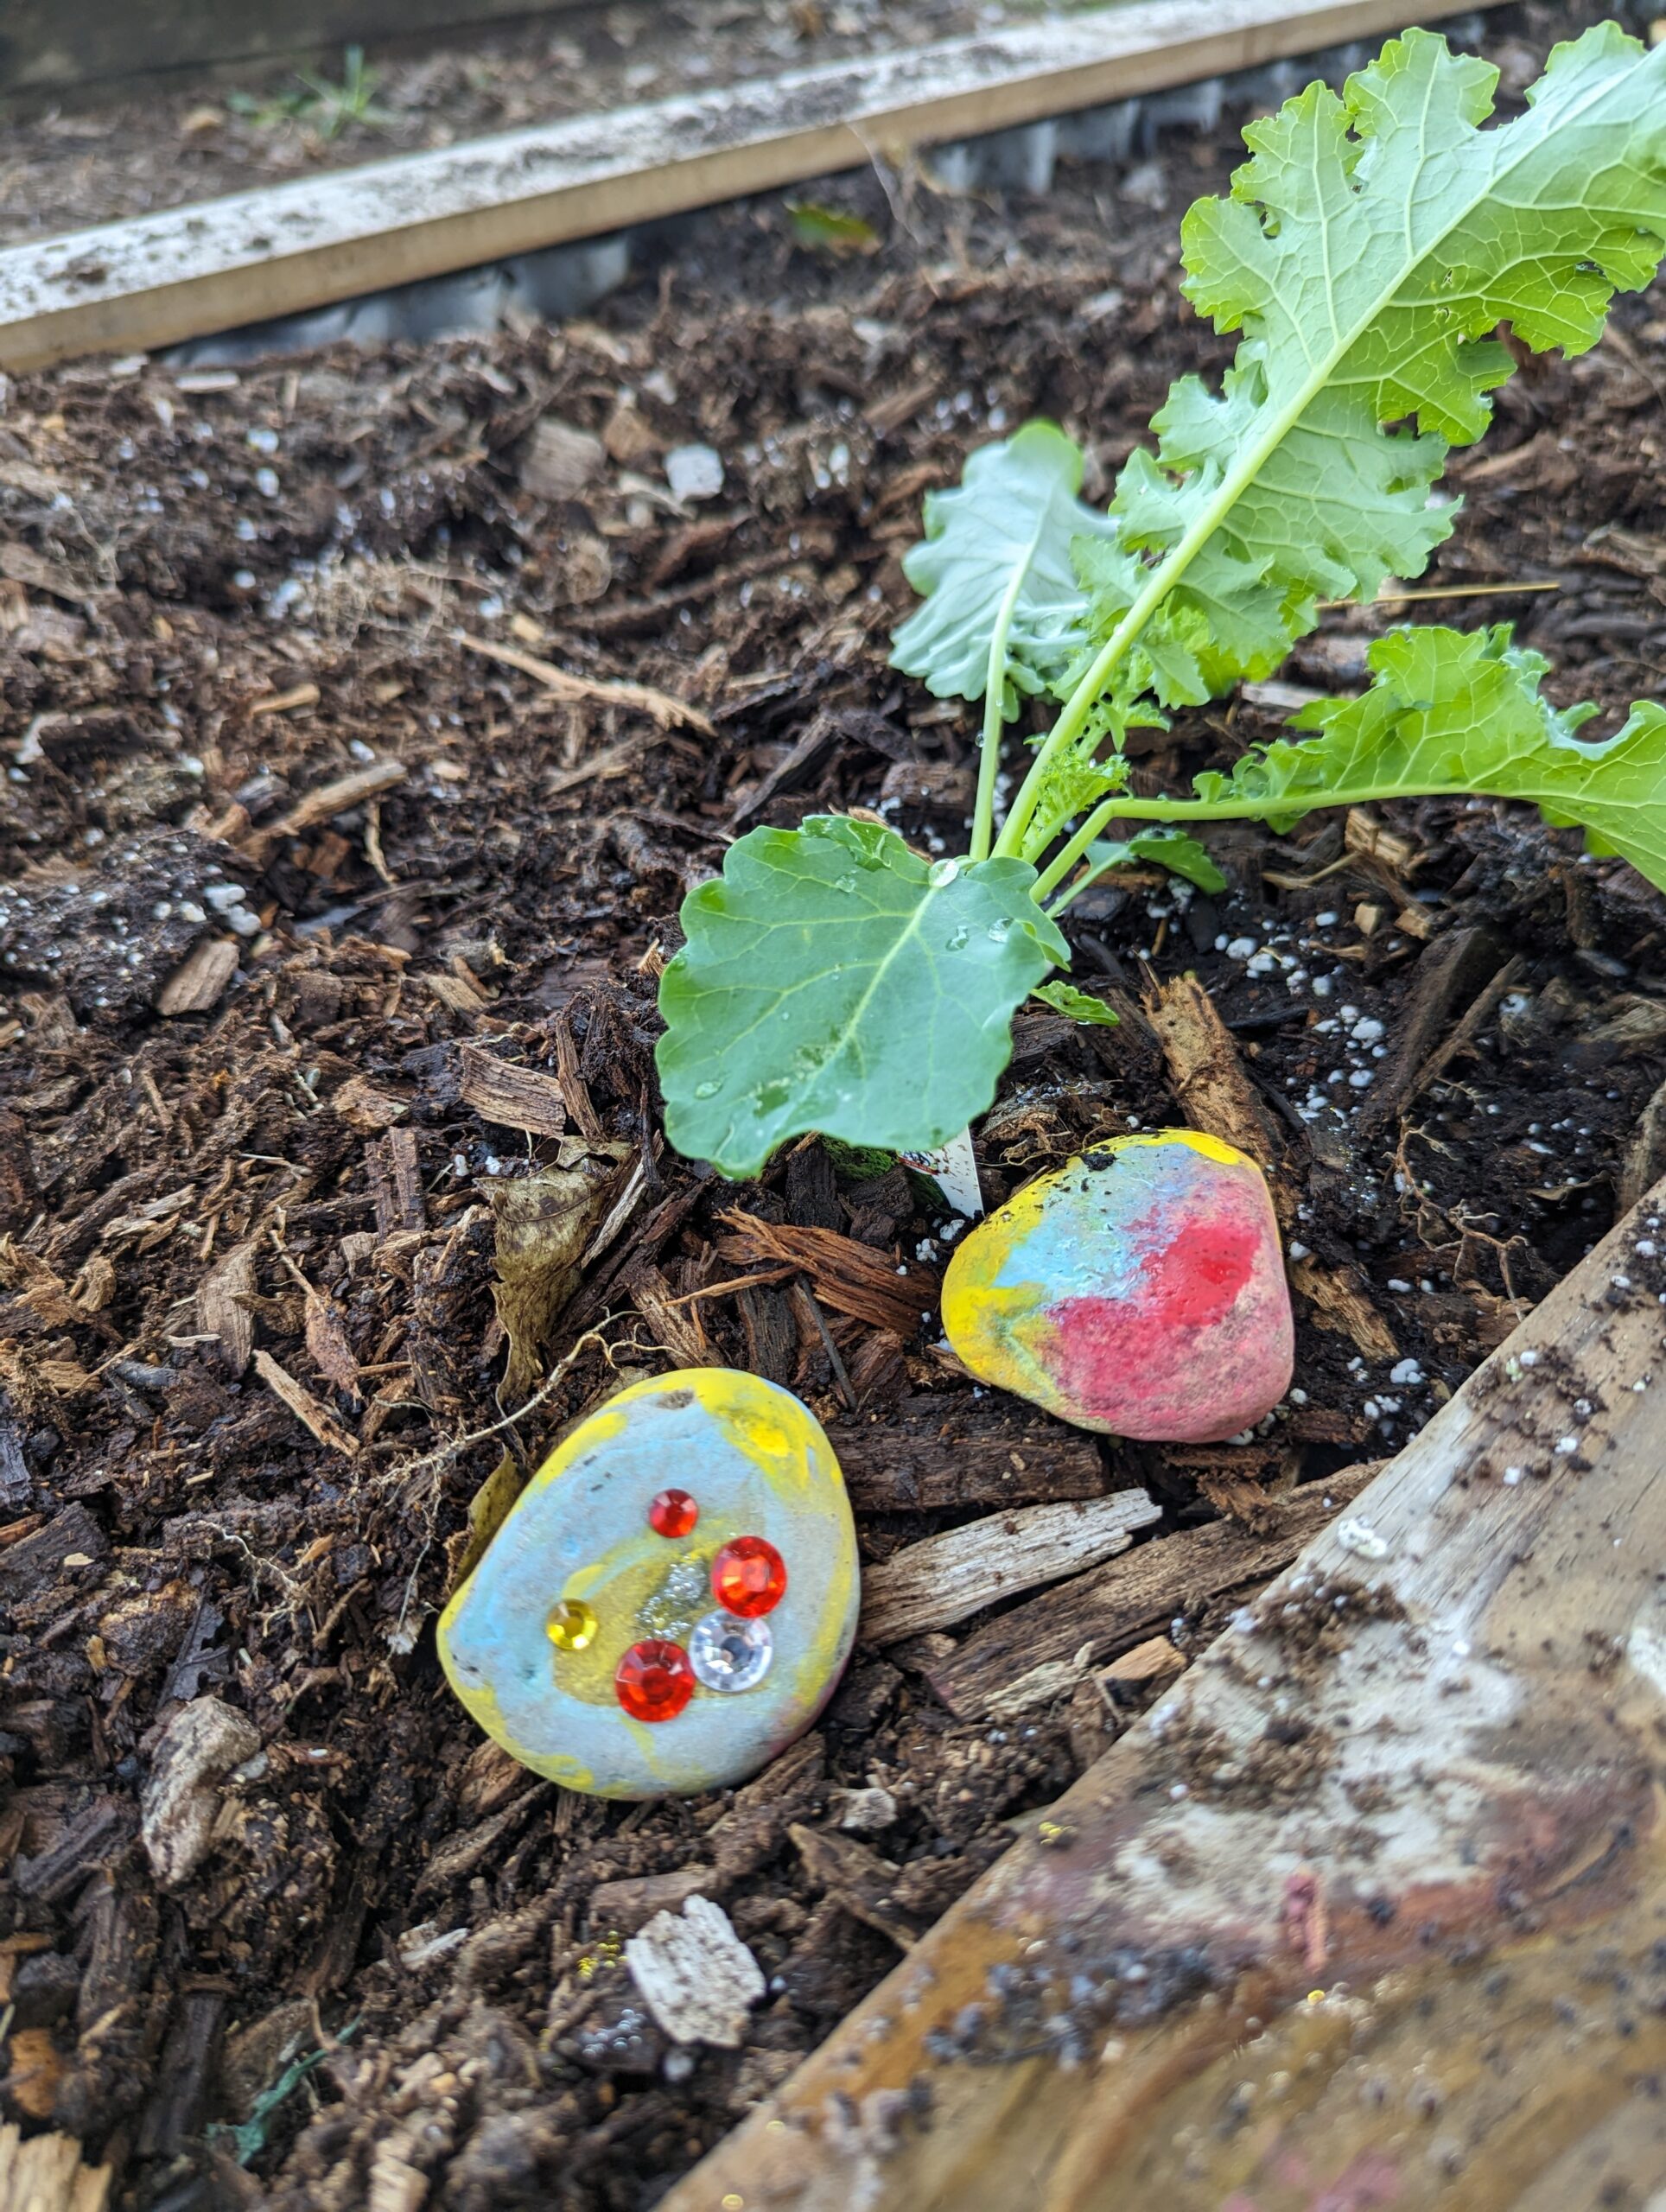 kale and two painted rocks.